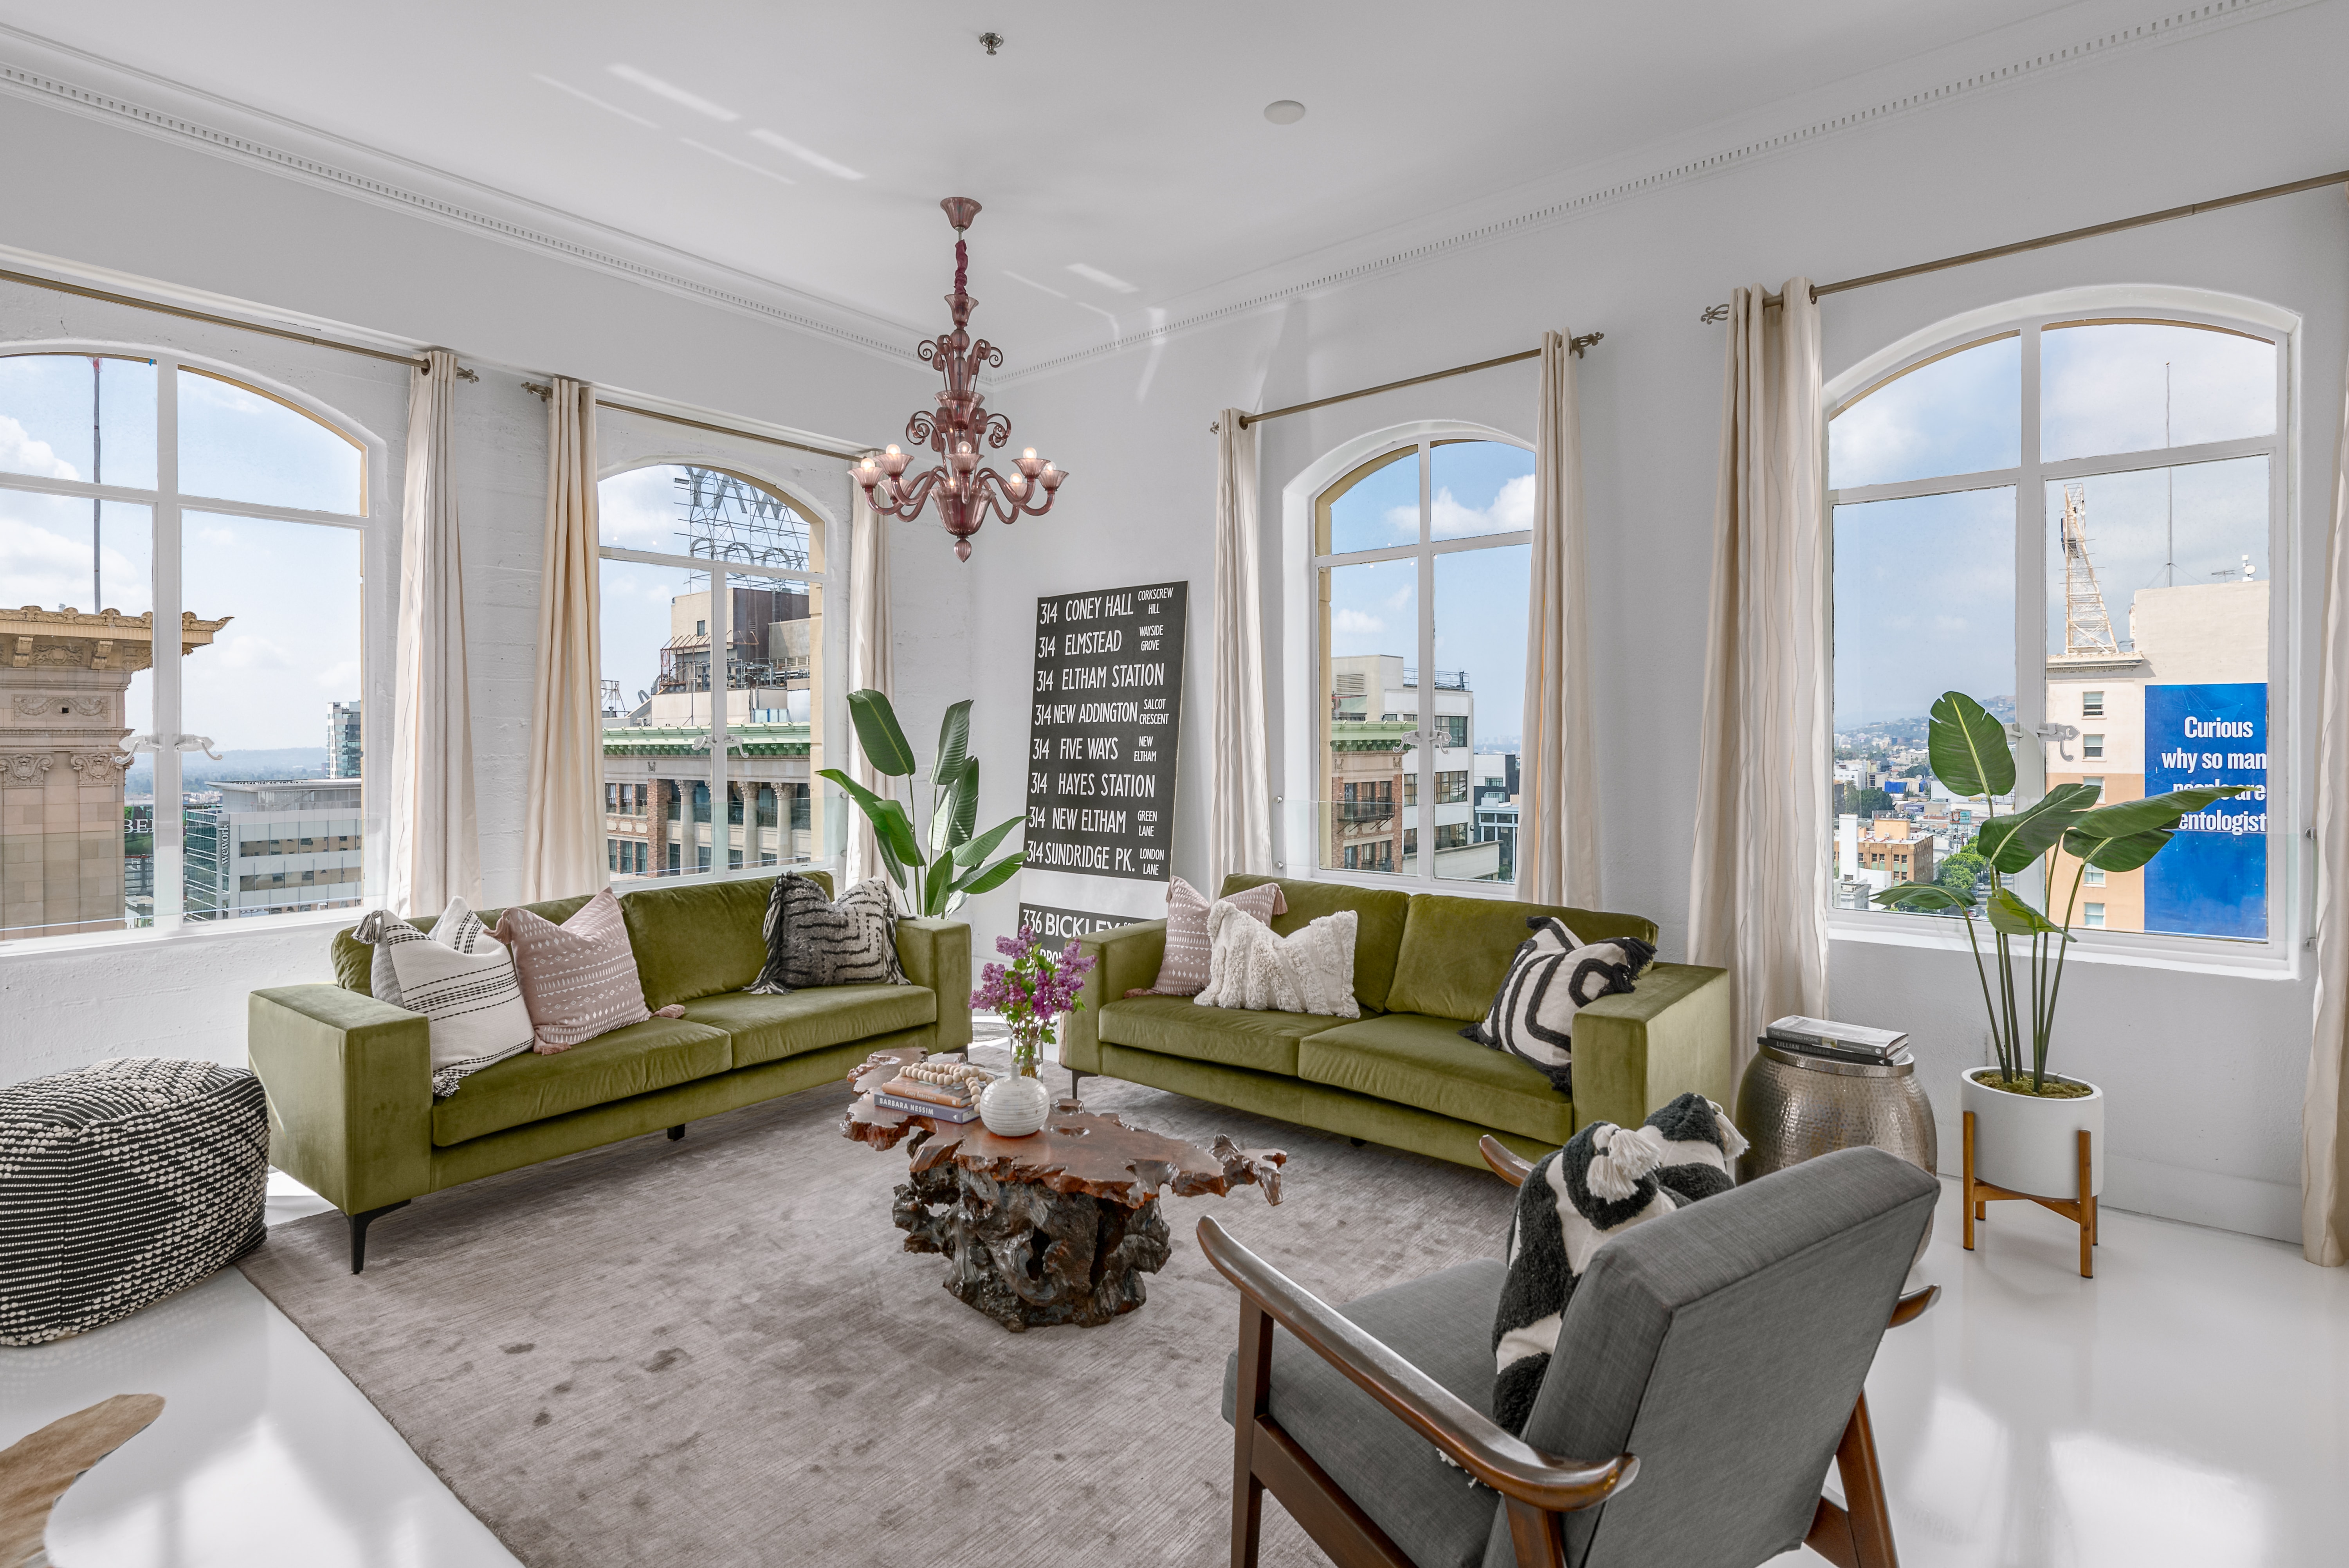 Stunning living area with arched windows looking out to breathtaking city views.